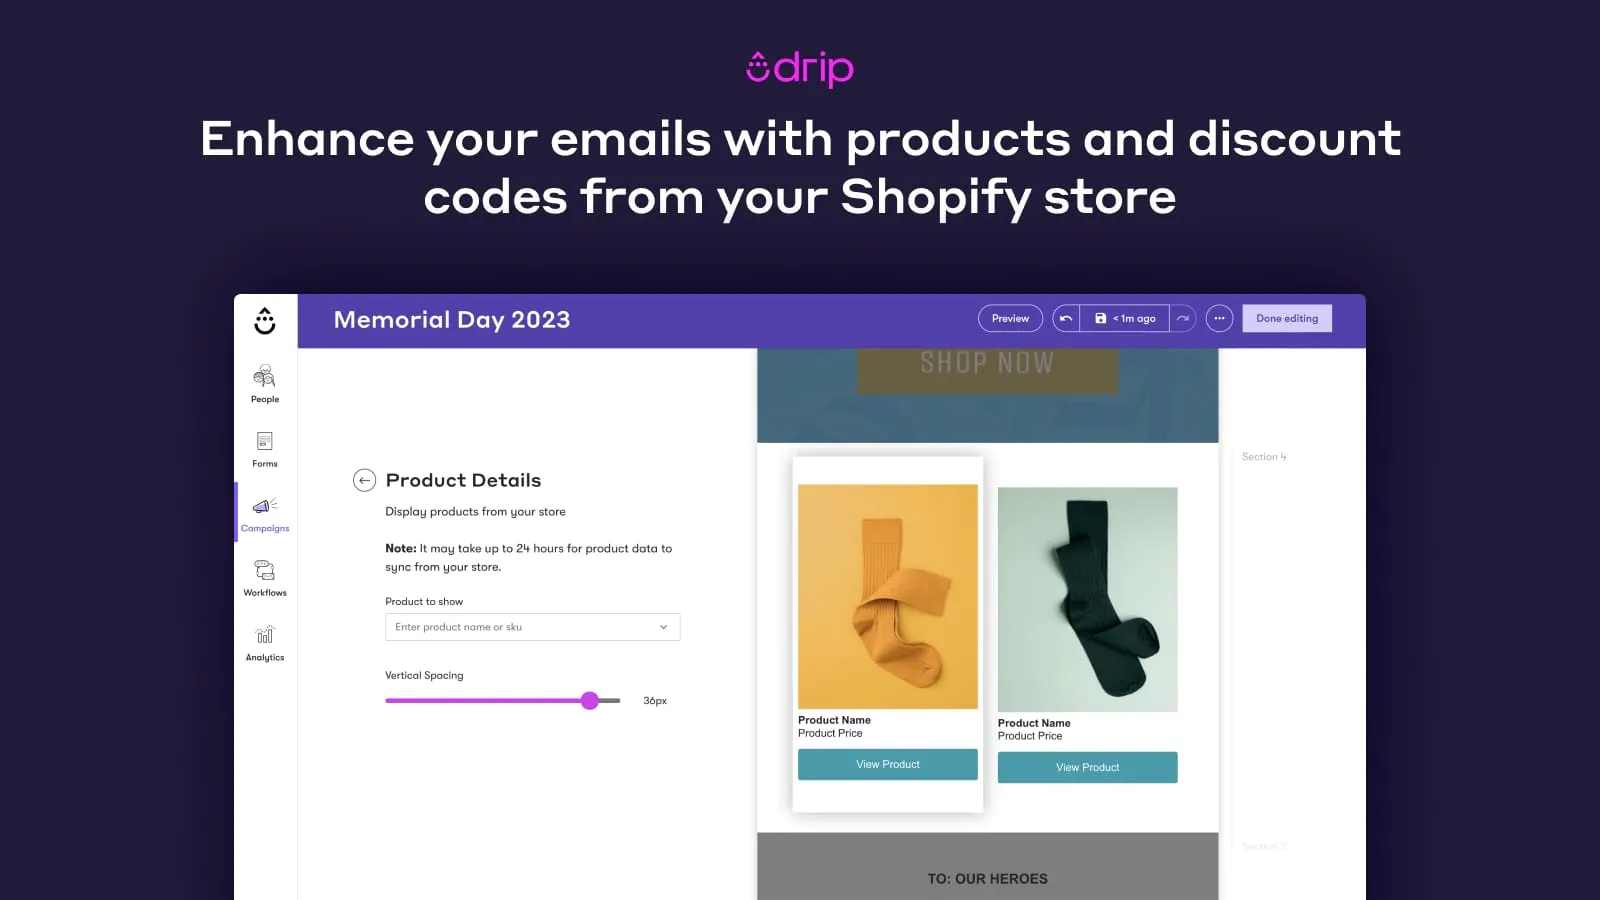 shopify apps gia email marketing drip app